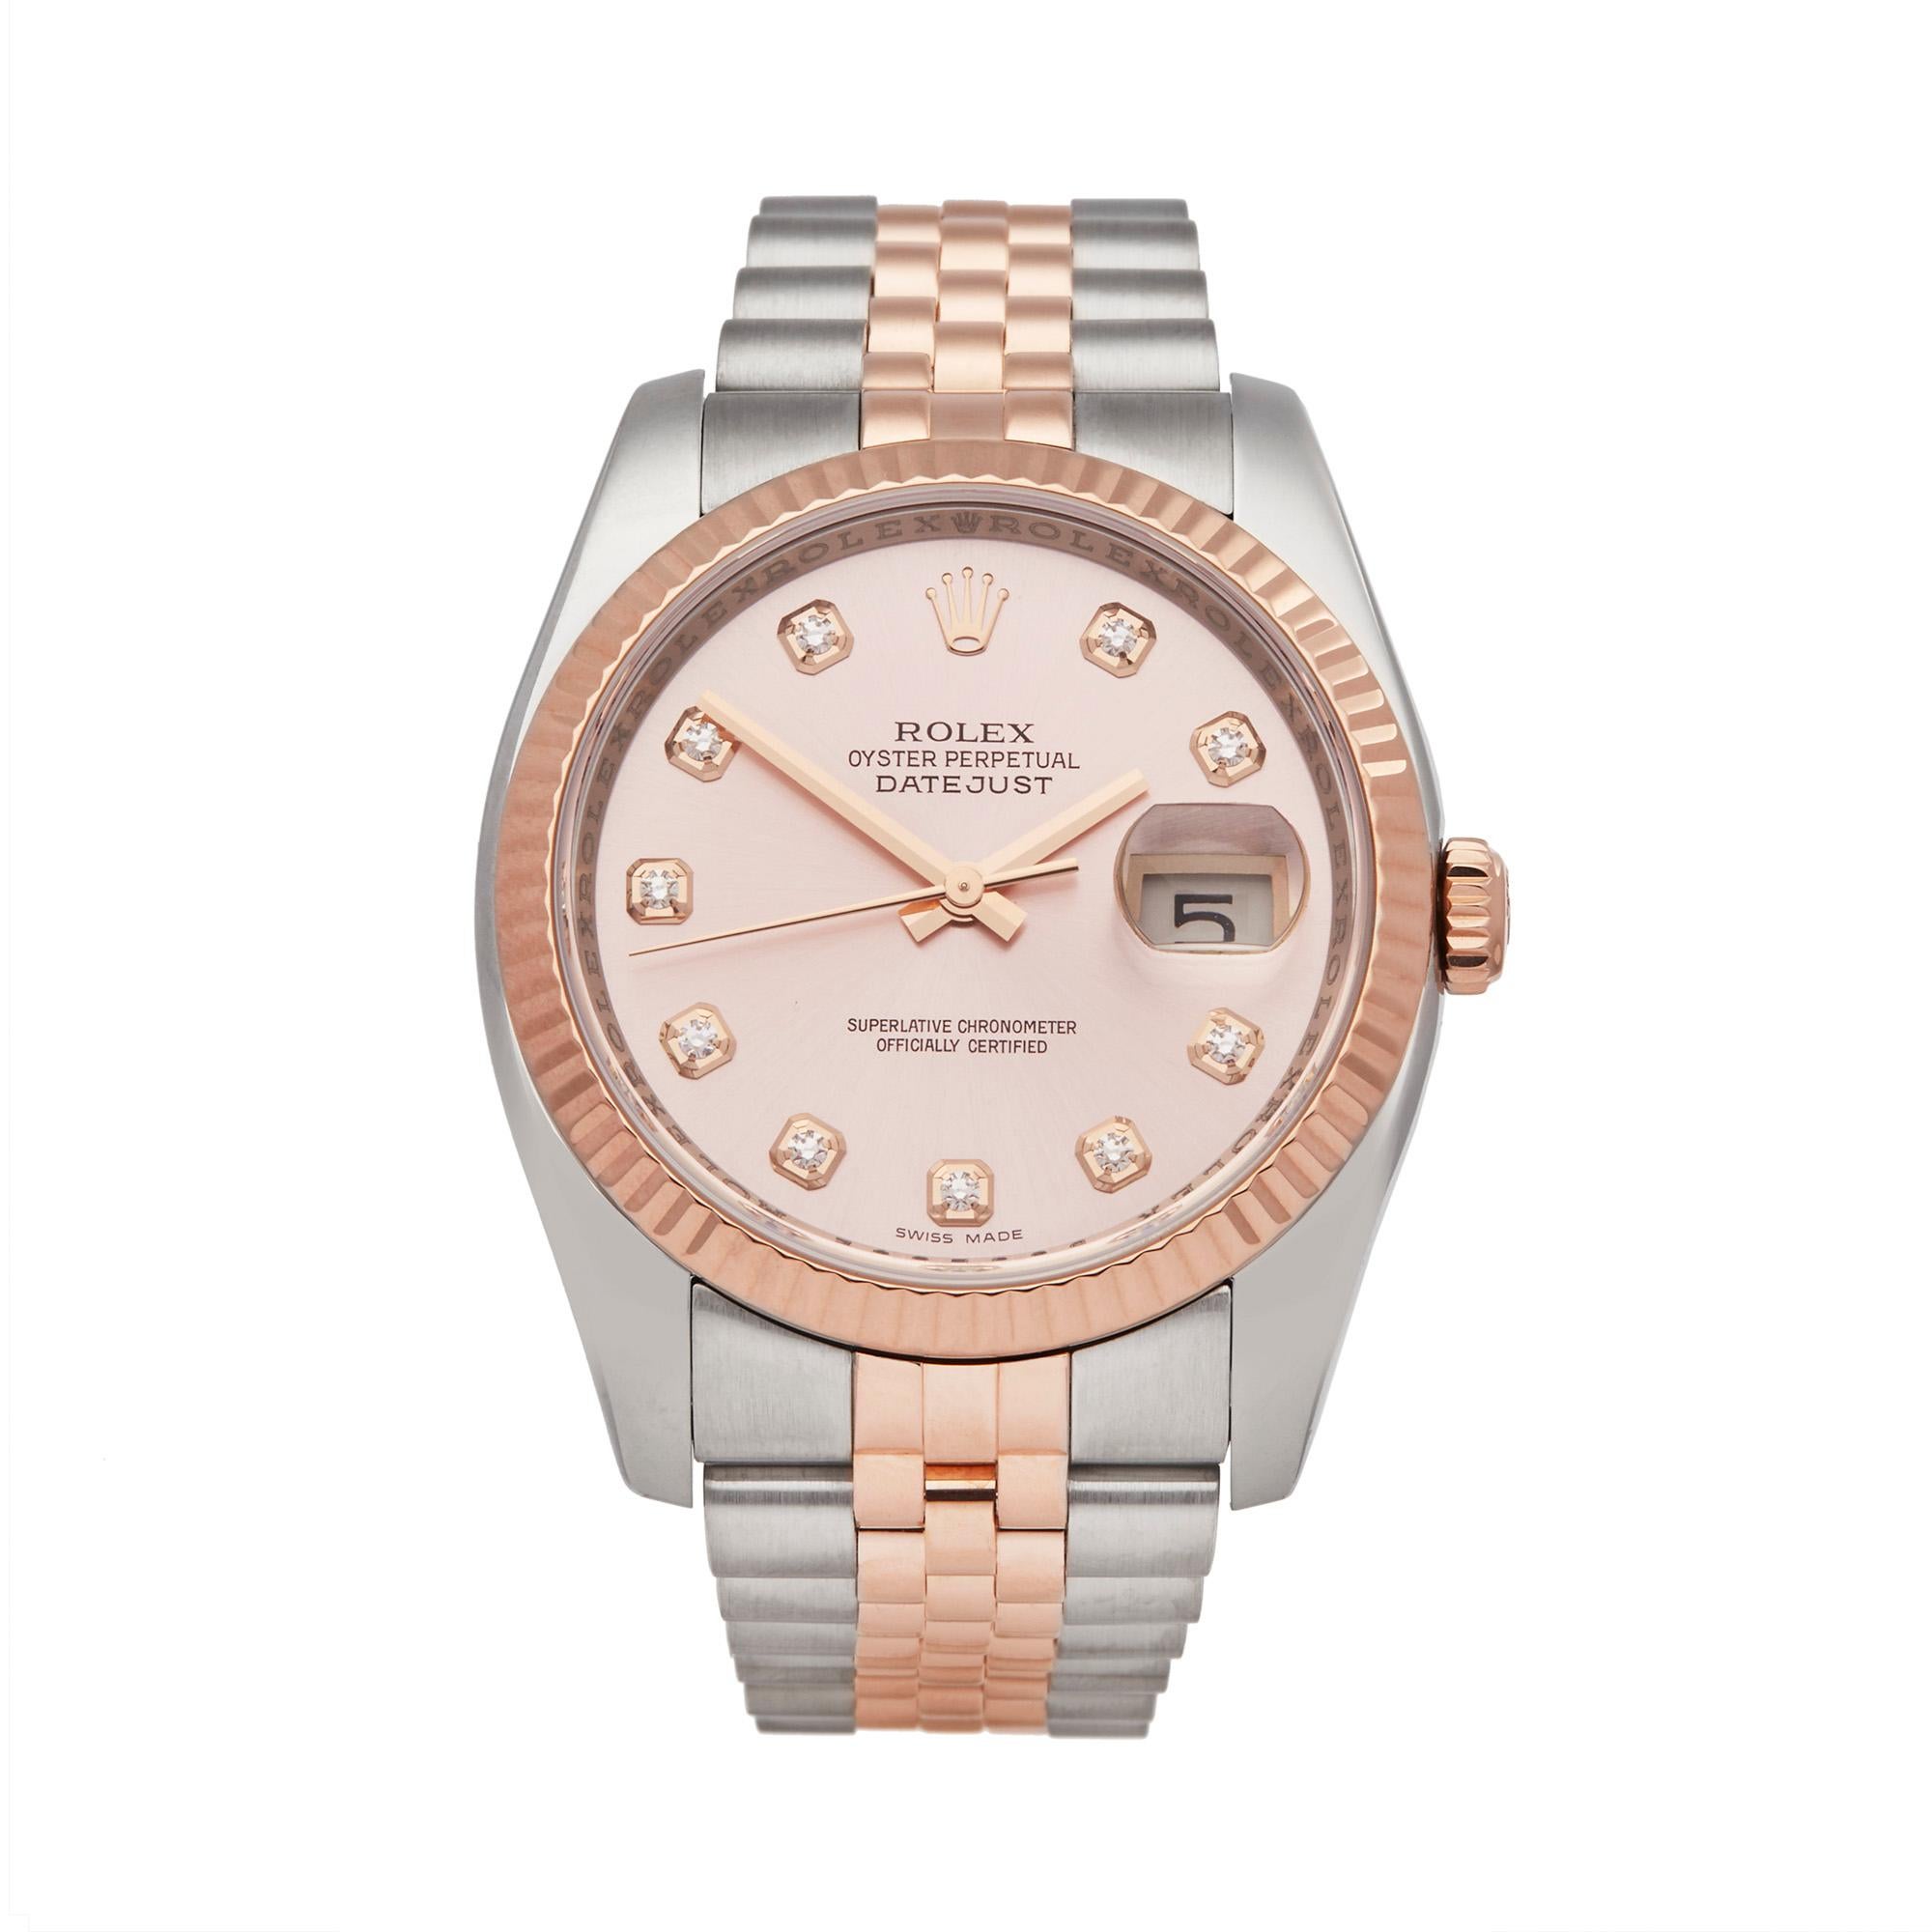 Rolex Datejust 36 Stainless Steel and 18K Rose Gold 116231